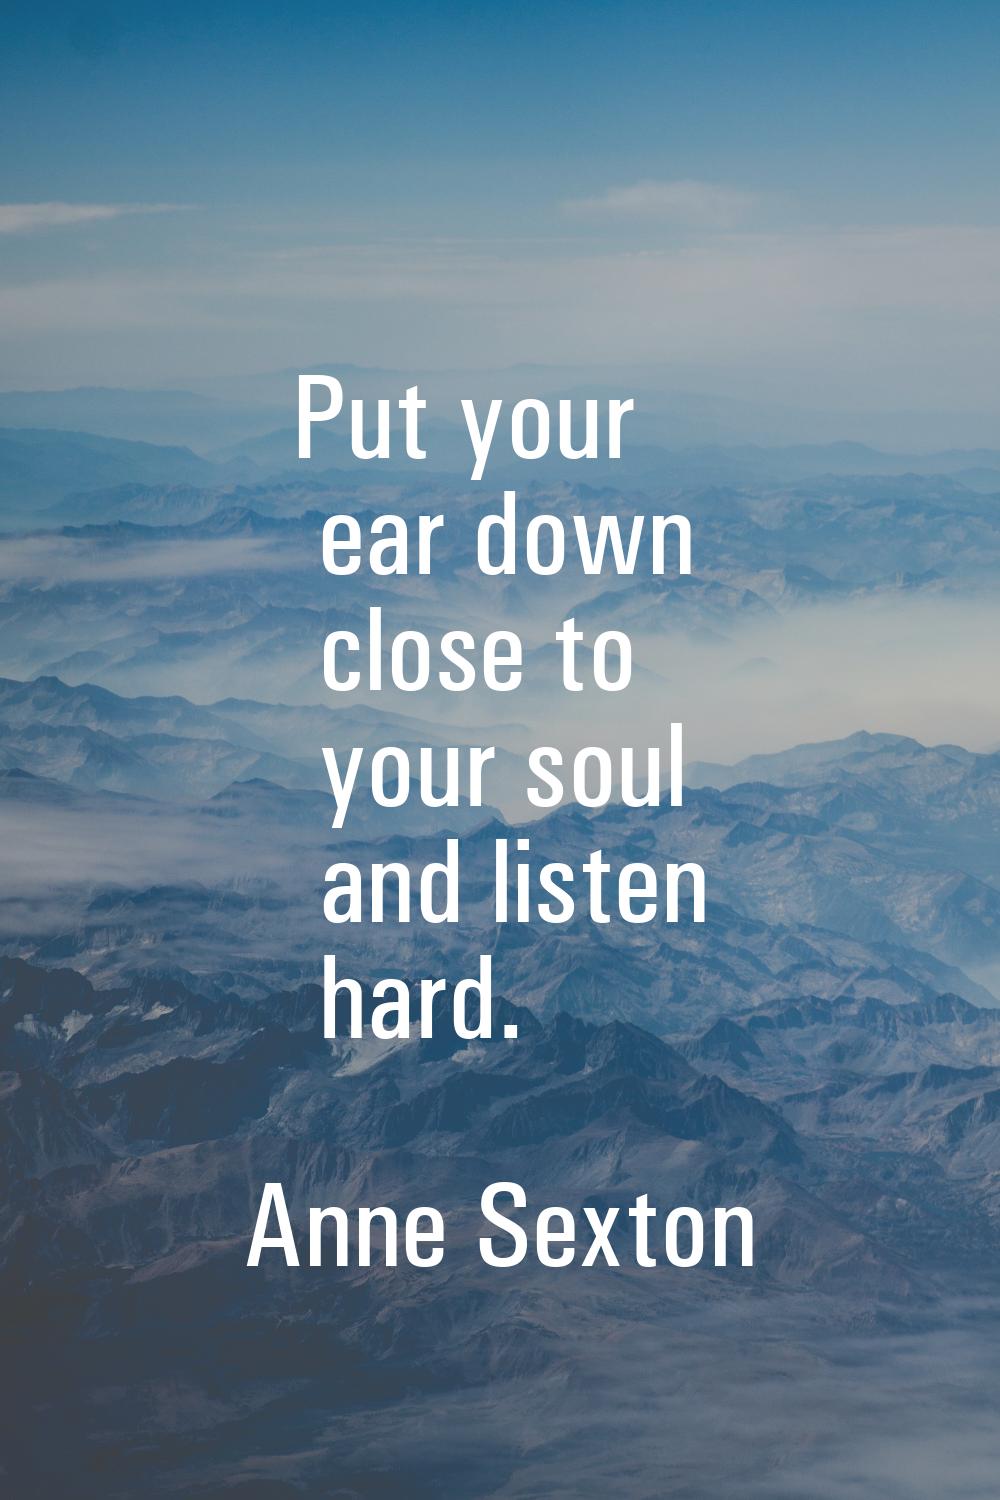 Put your ear down close to your soul and listen hard.